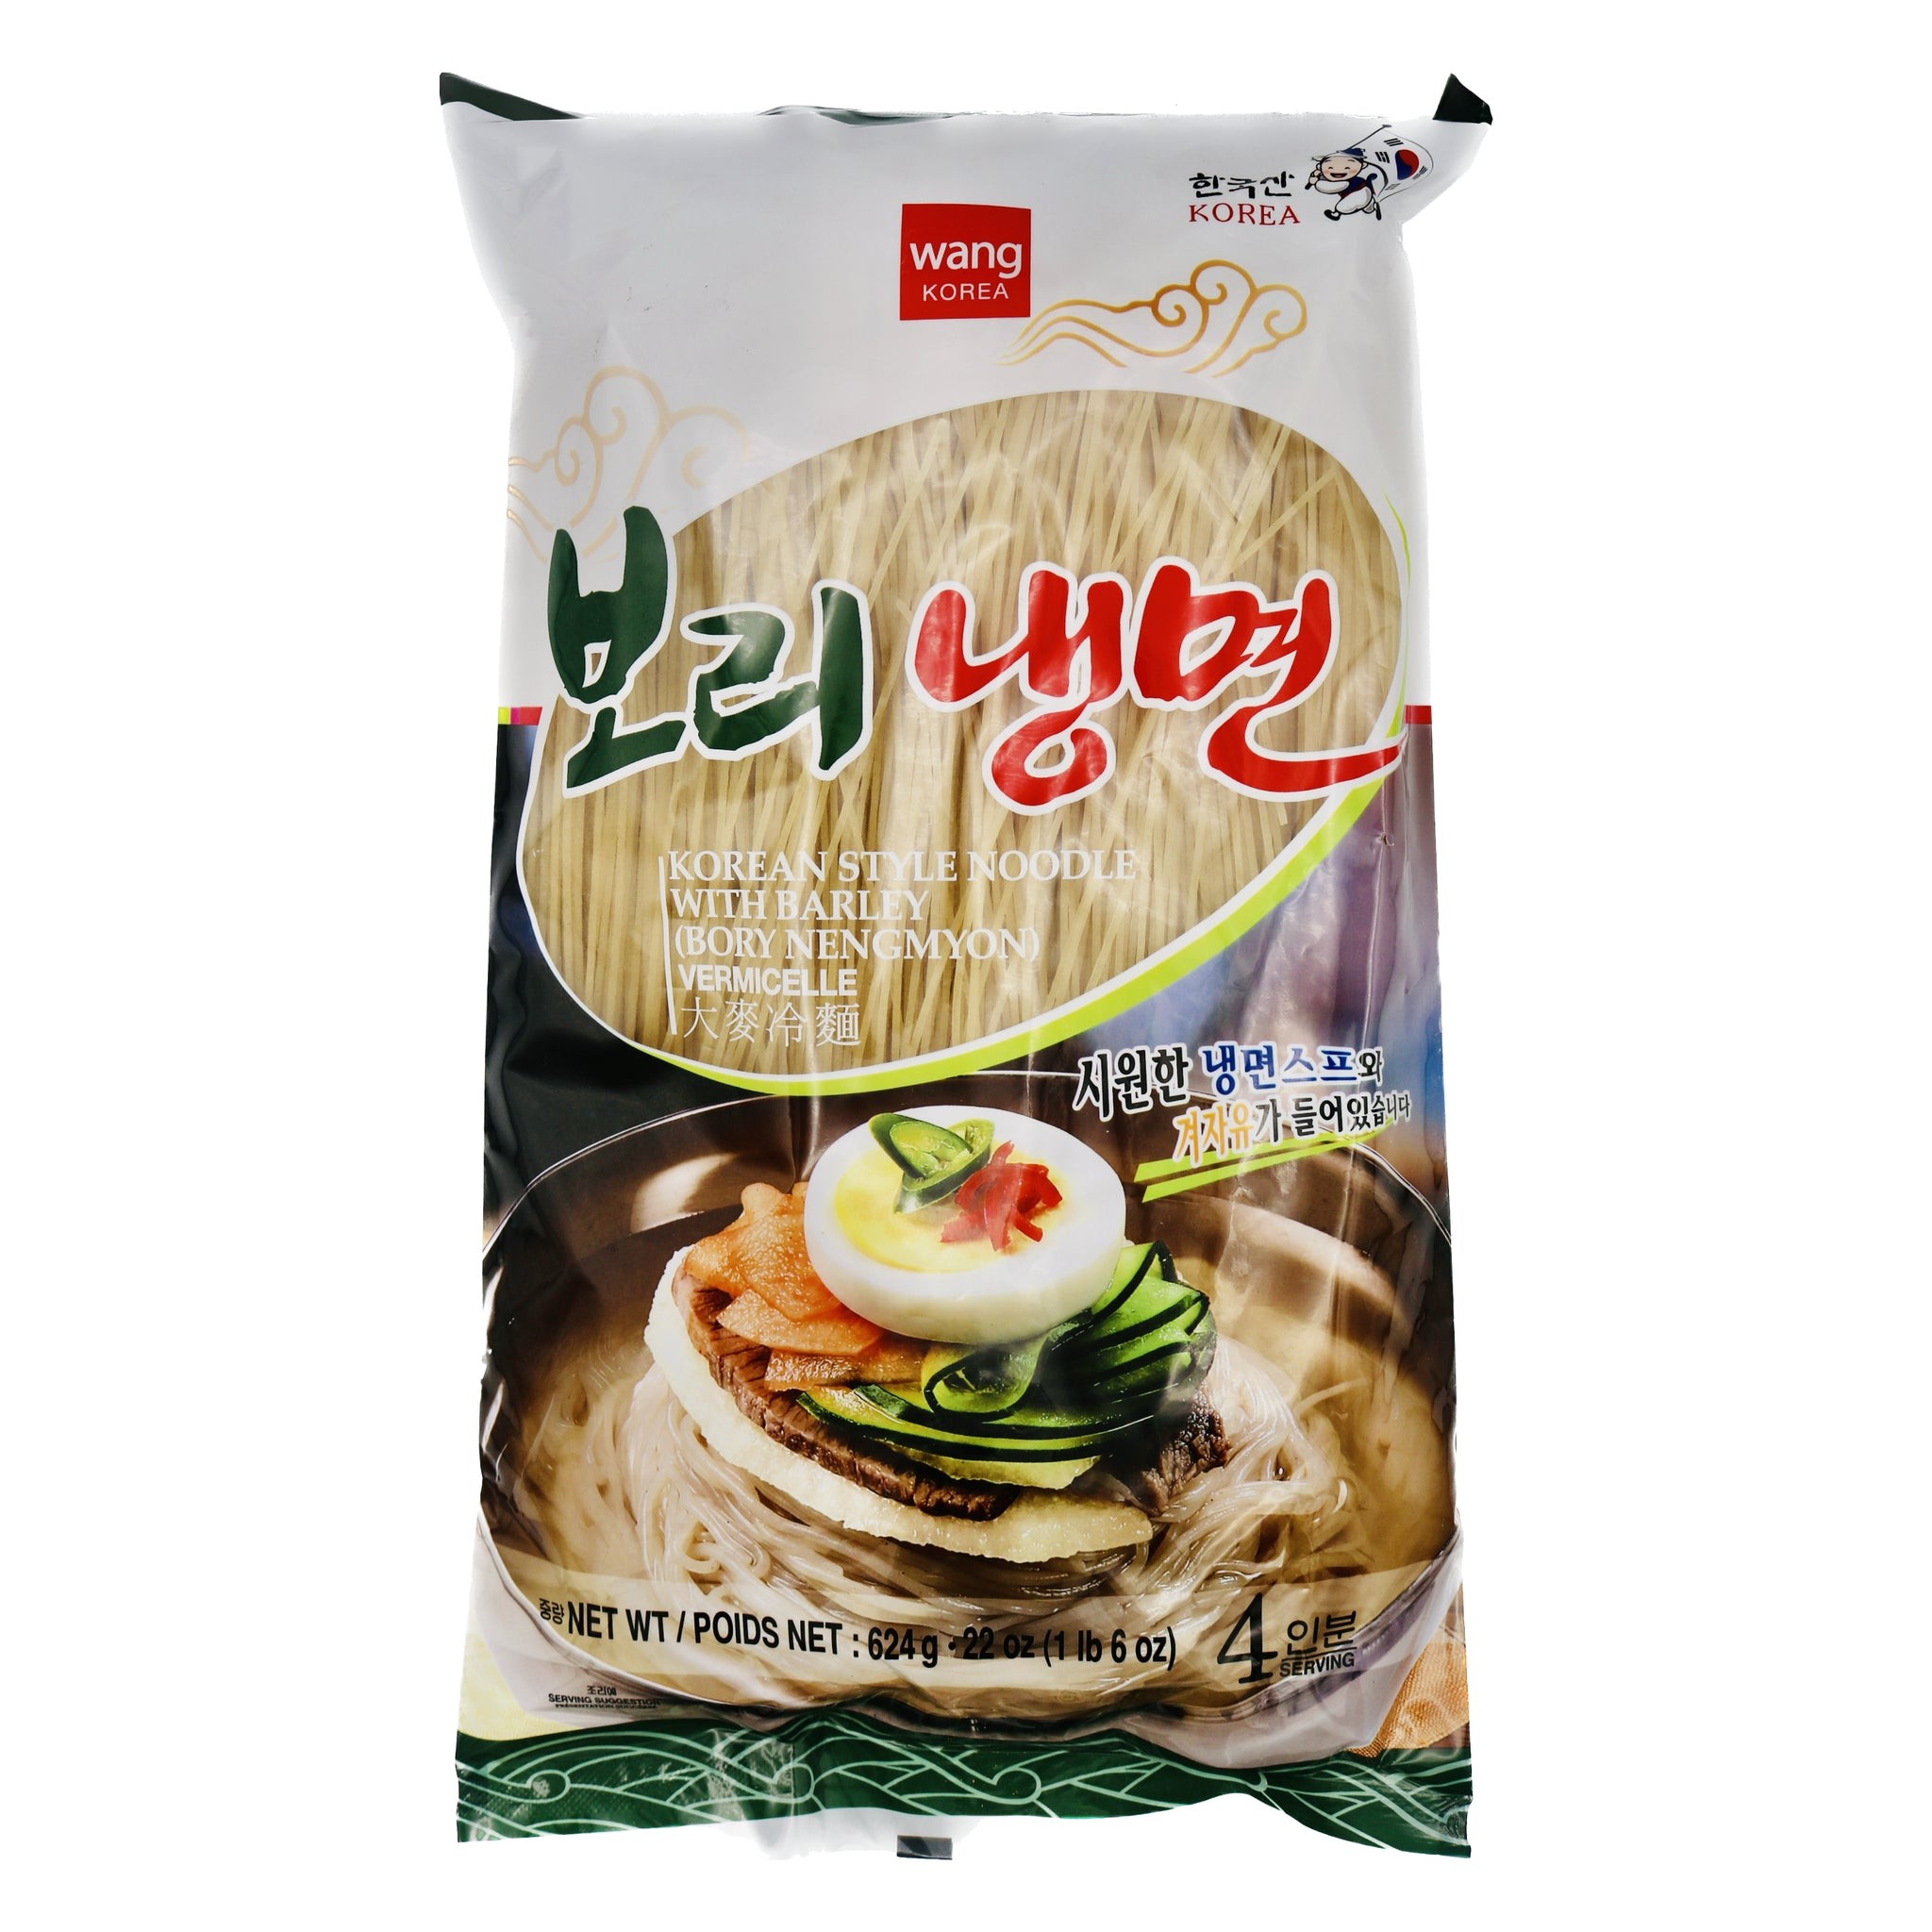 wang-korean-style-noodle-with-barley